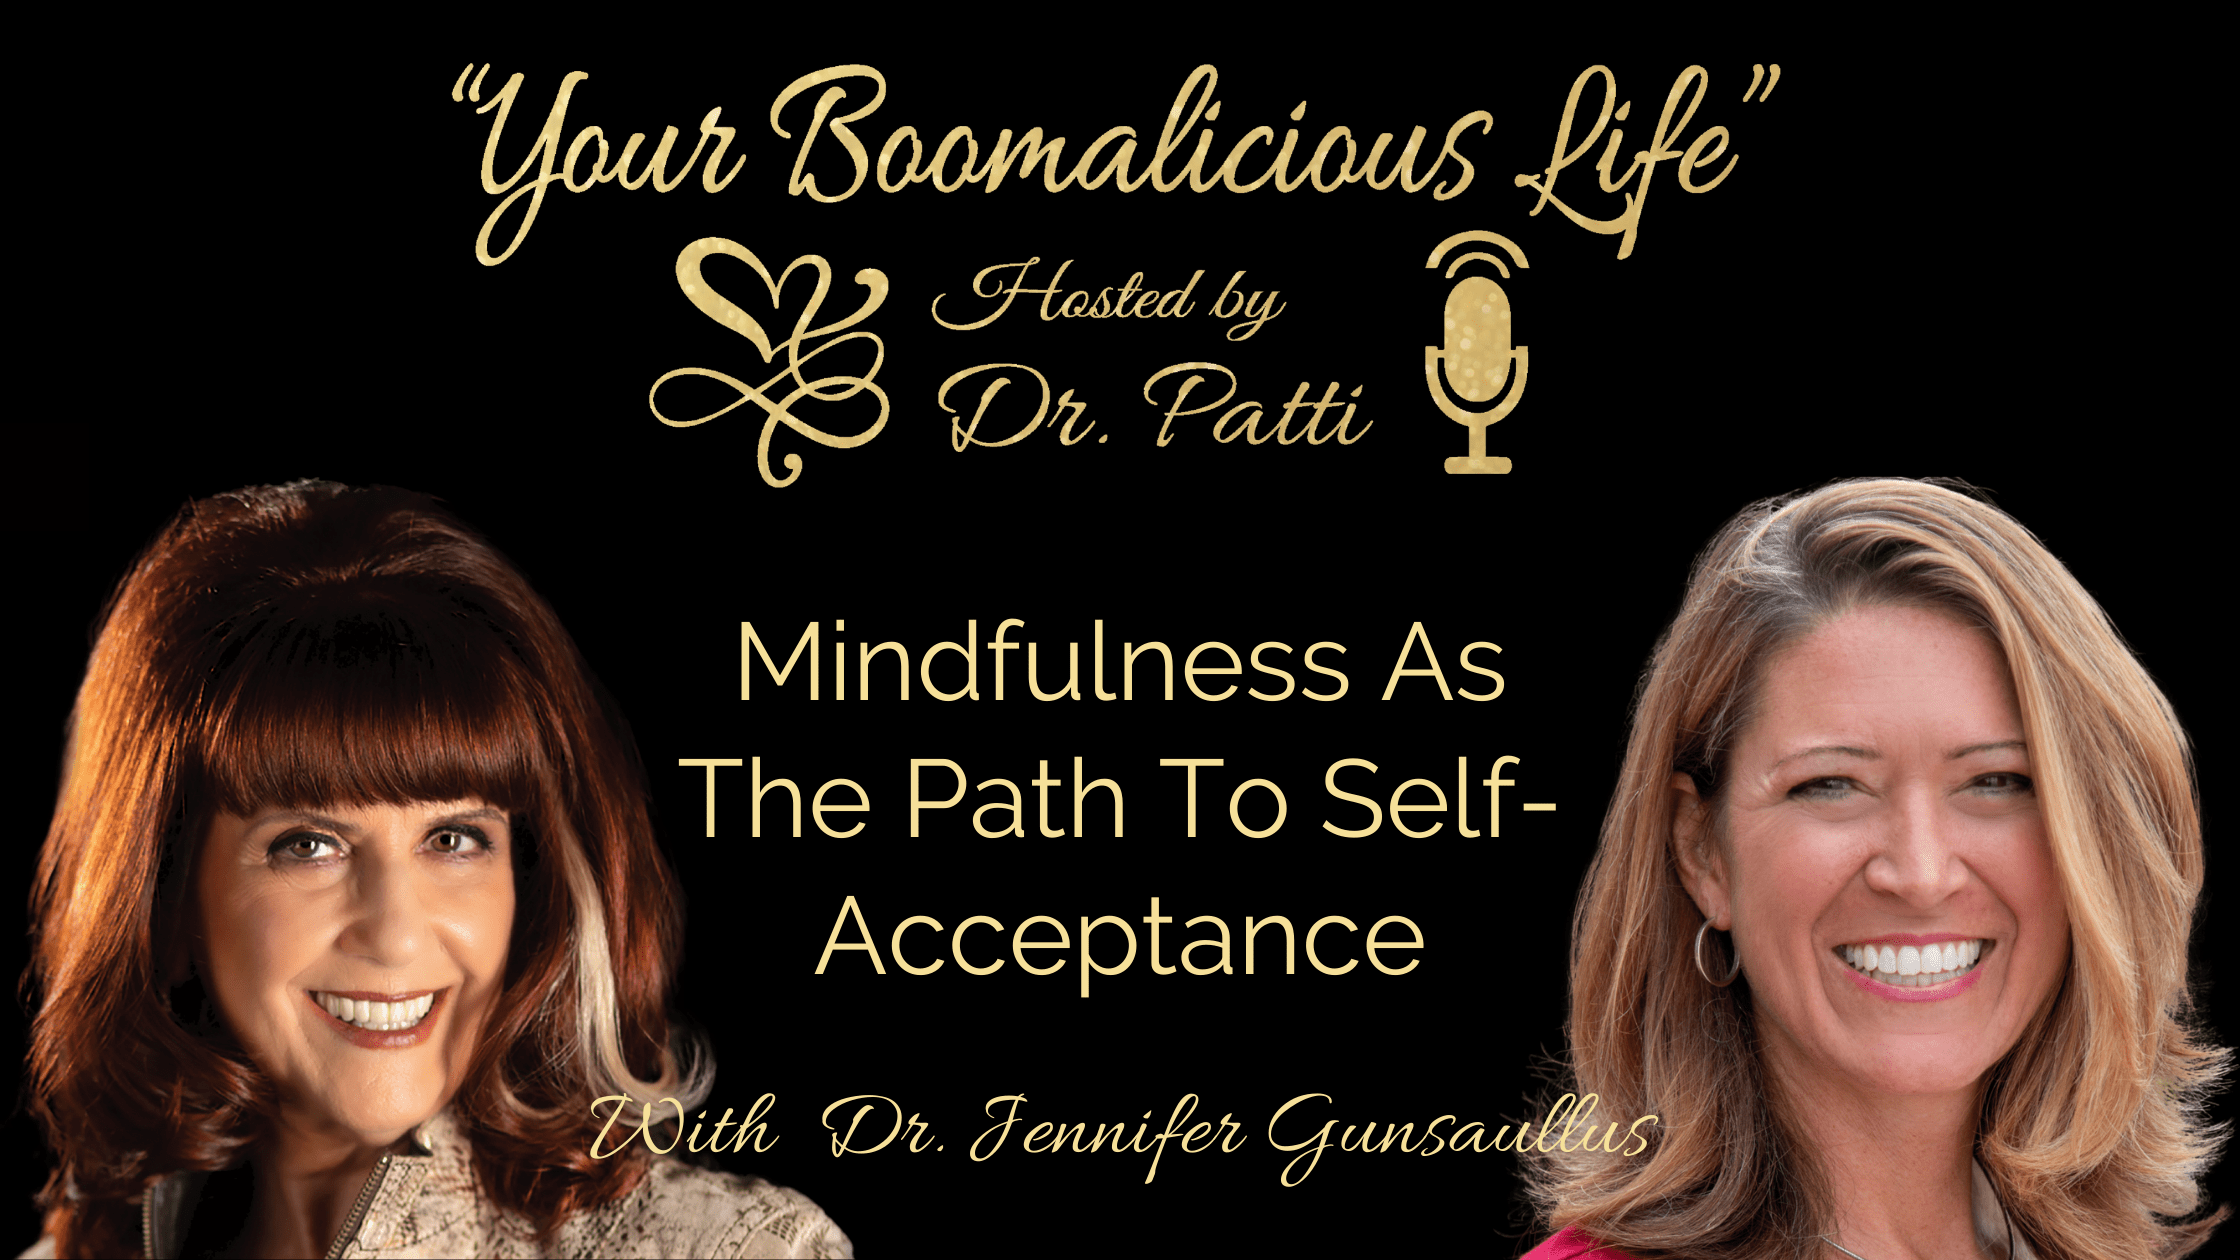 Episode 25: “Mindfulness As The Path To Self-Acceptance”